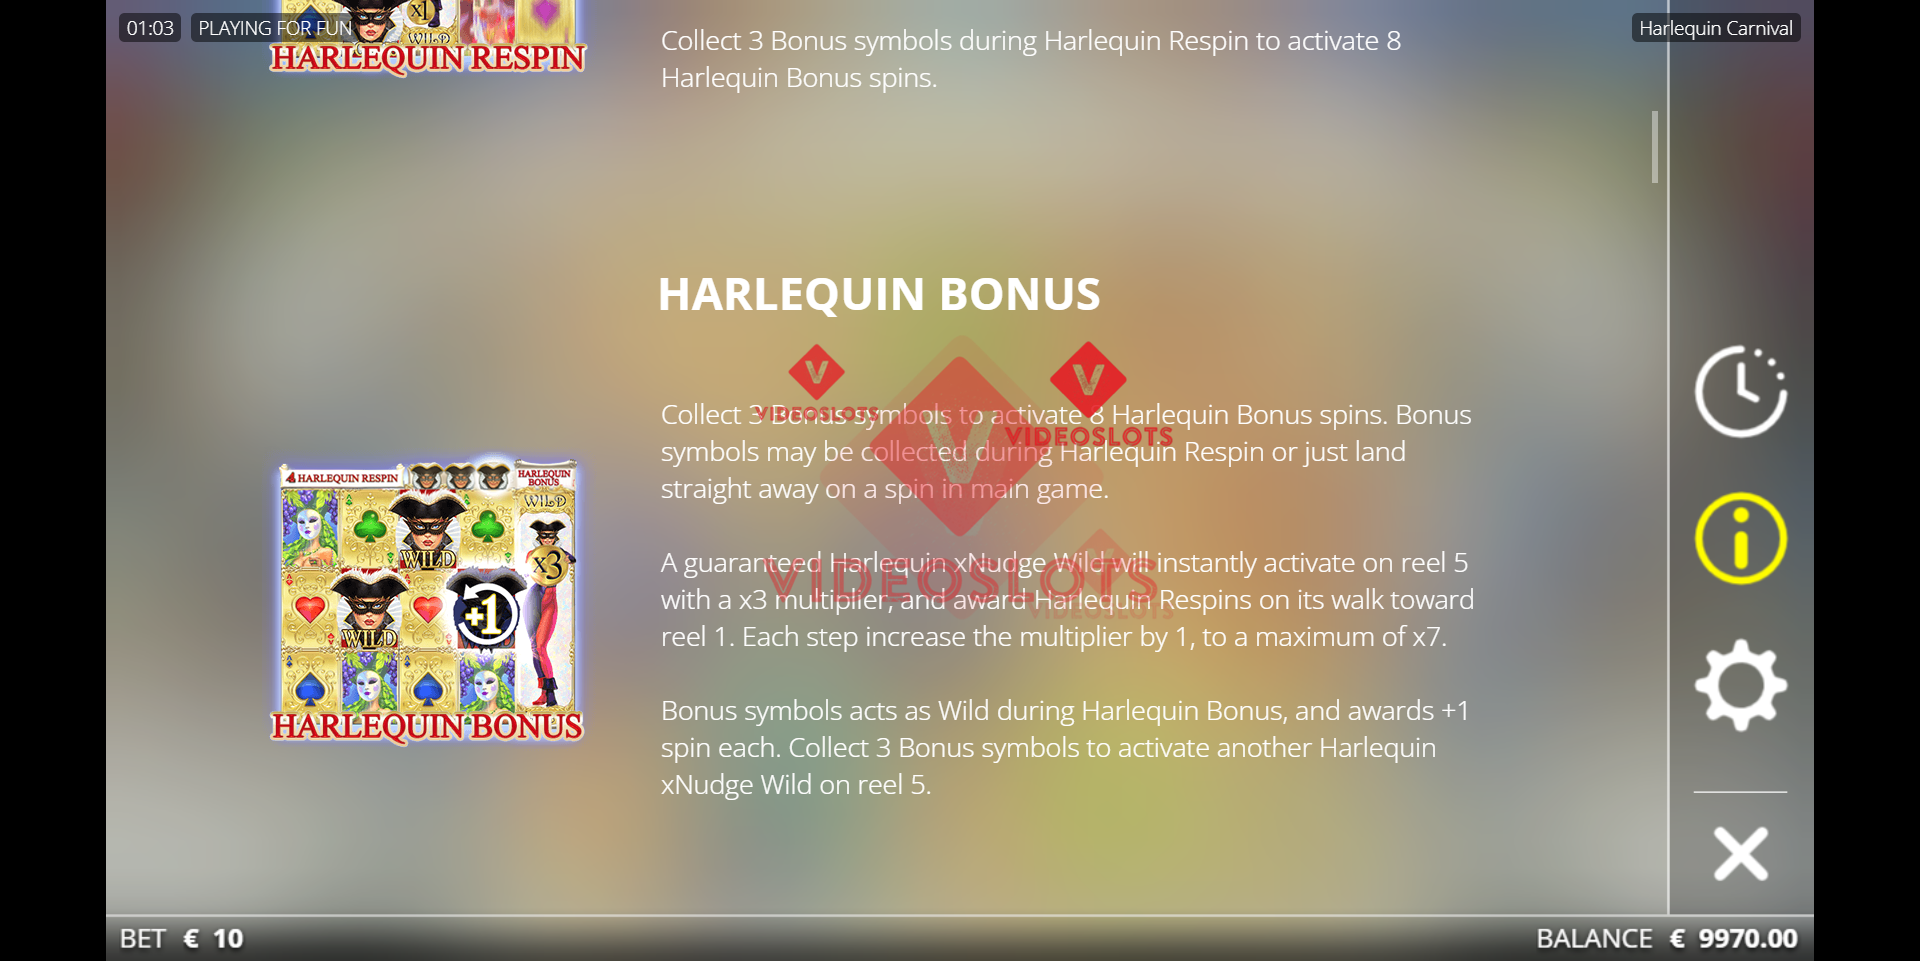 Pay Table for Harlequin Carnival slot from NoLimit City